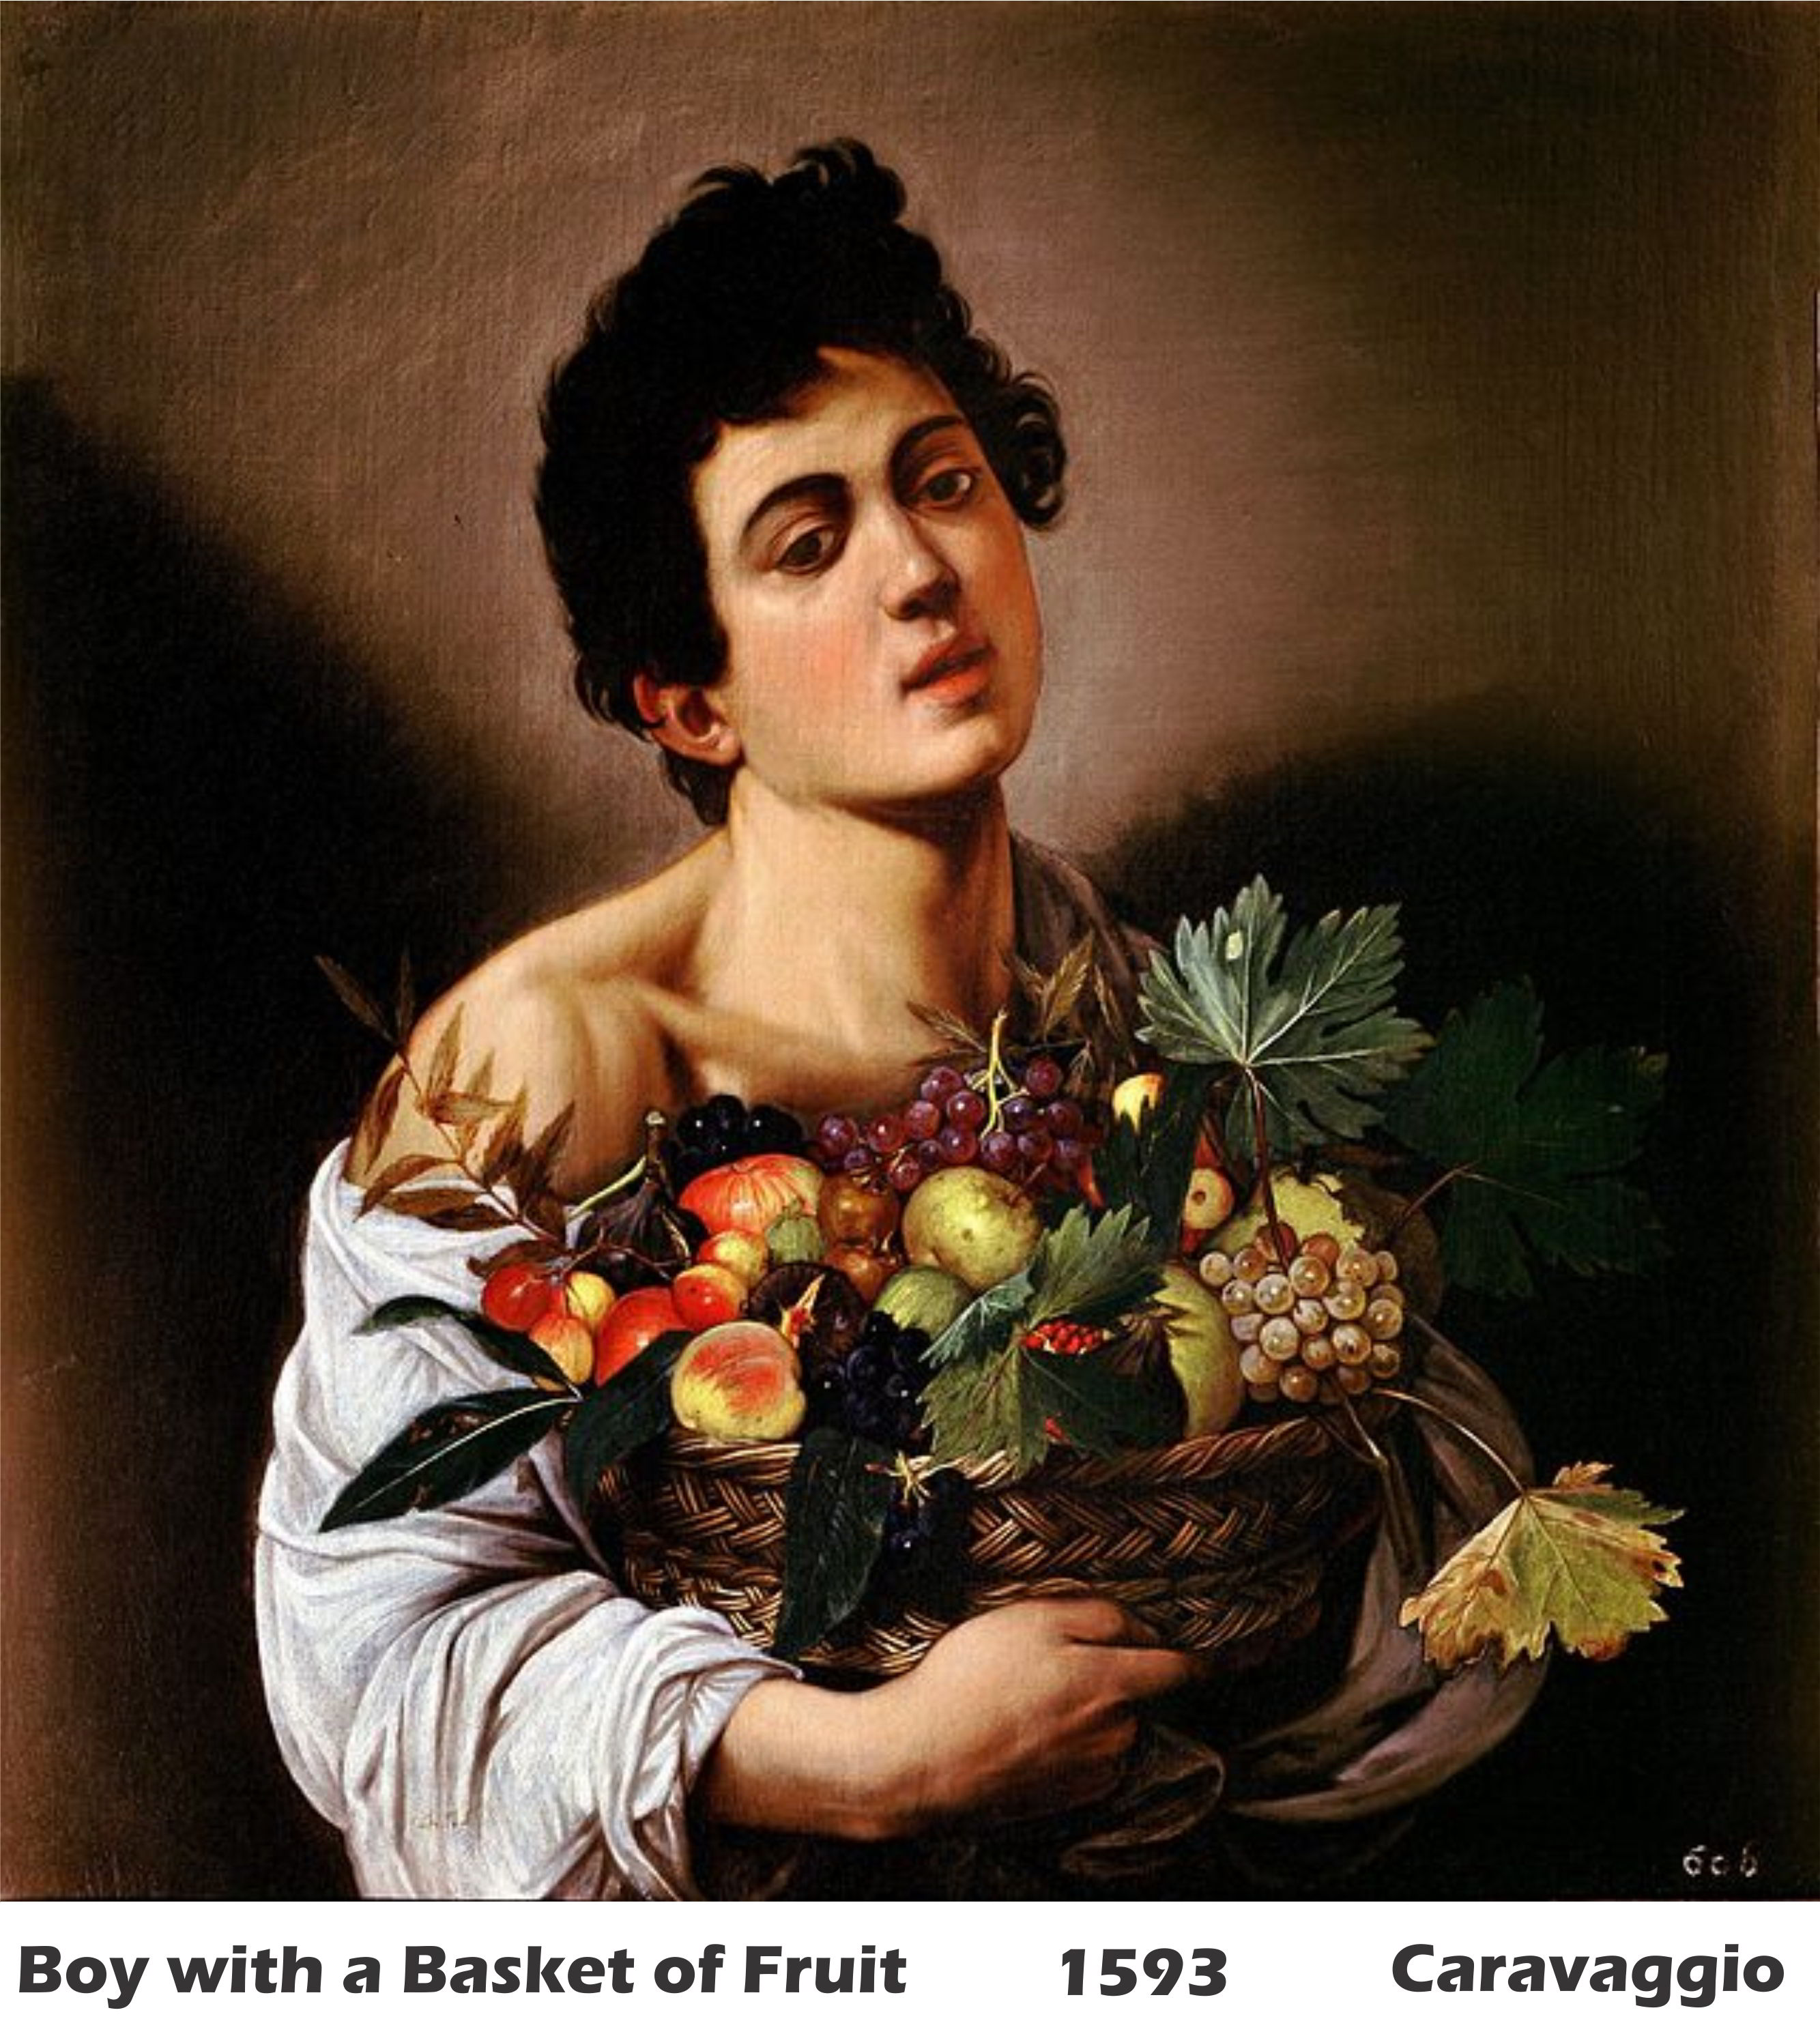 Boy with a Basket of Fruit by Caravaggio